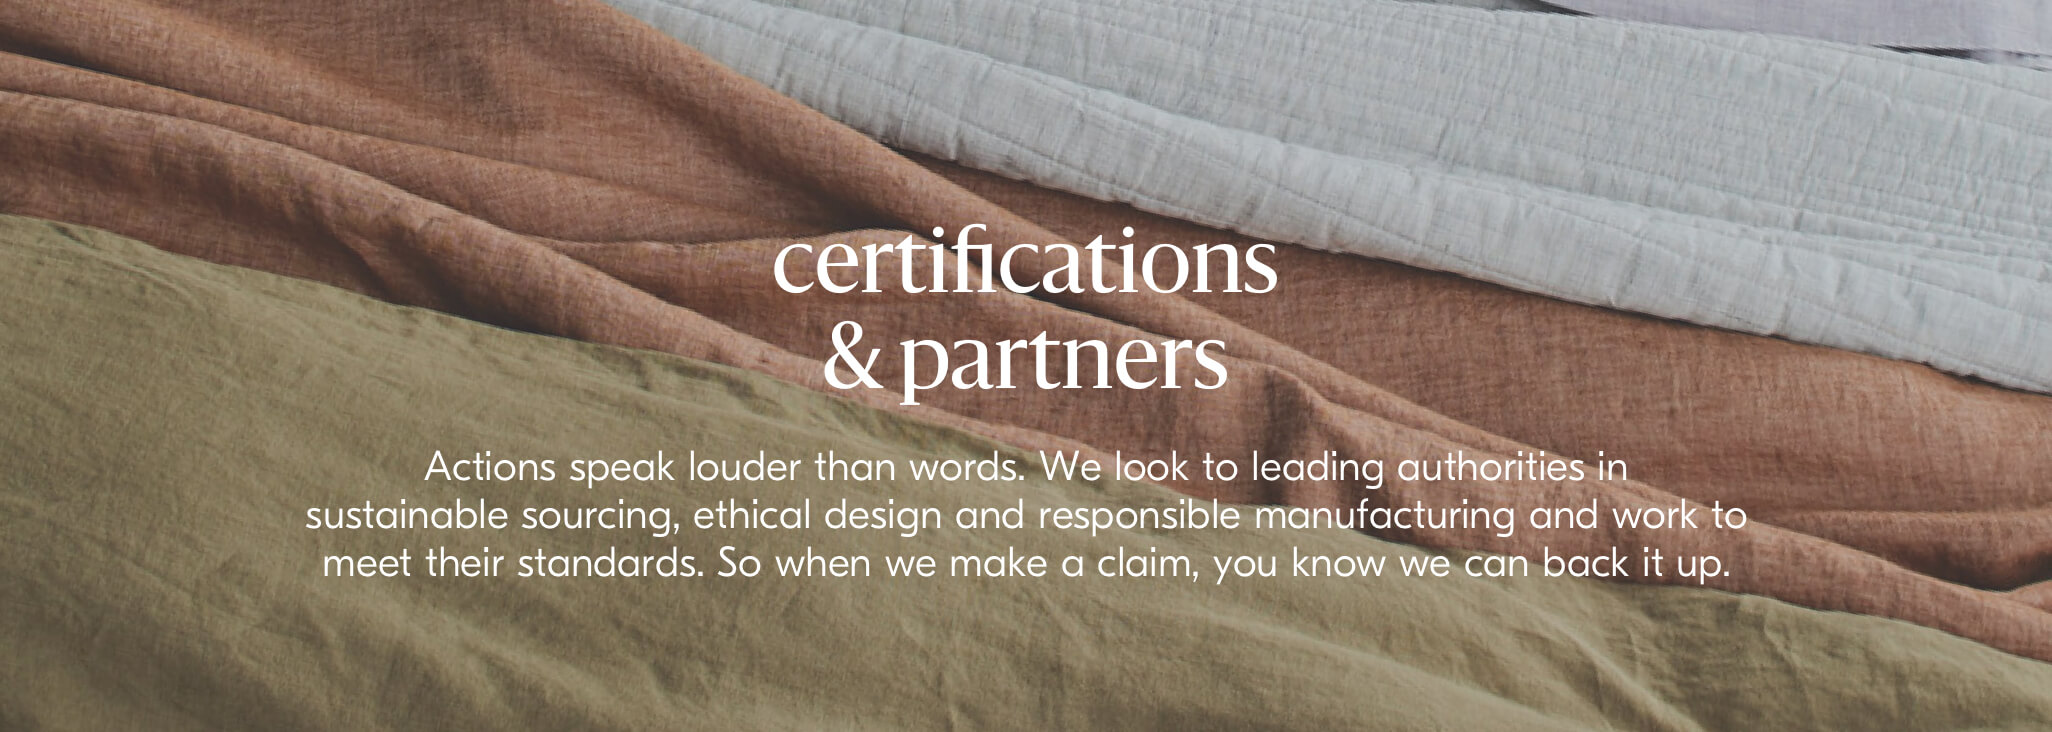 certifications and partners